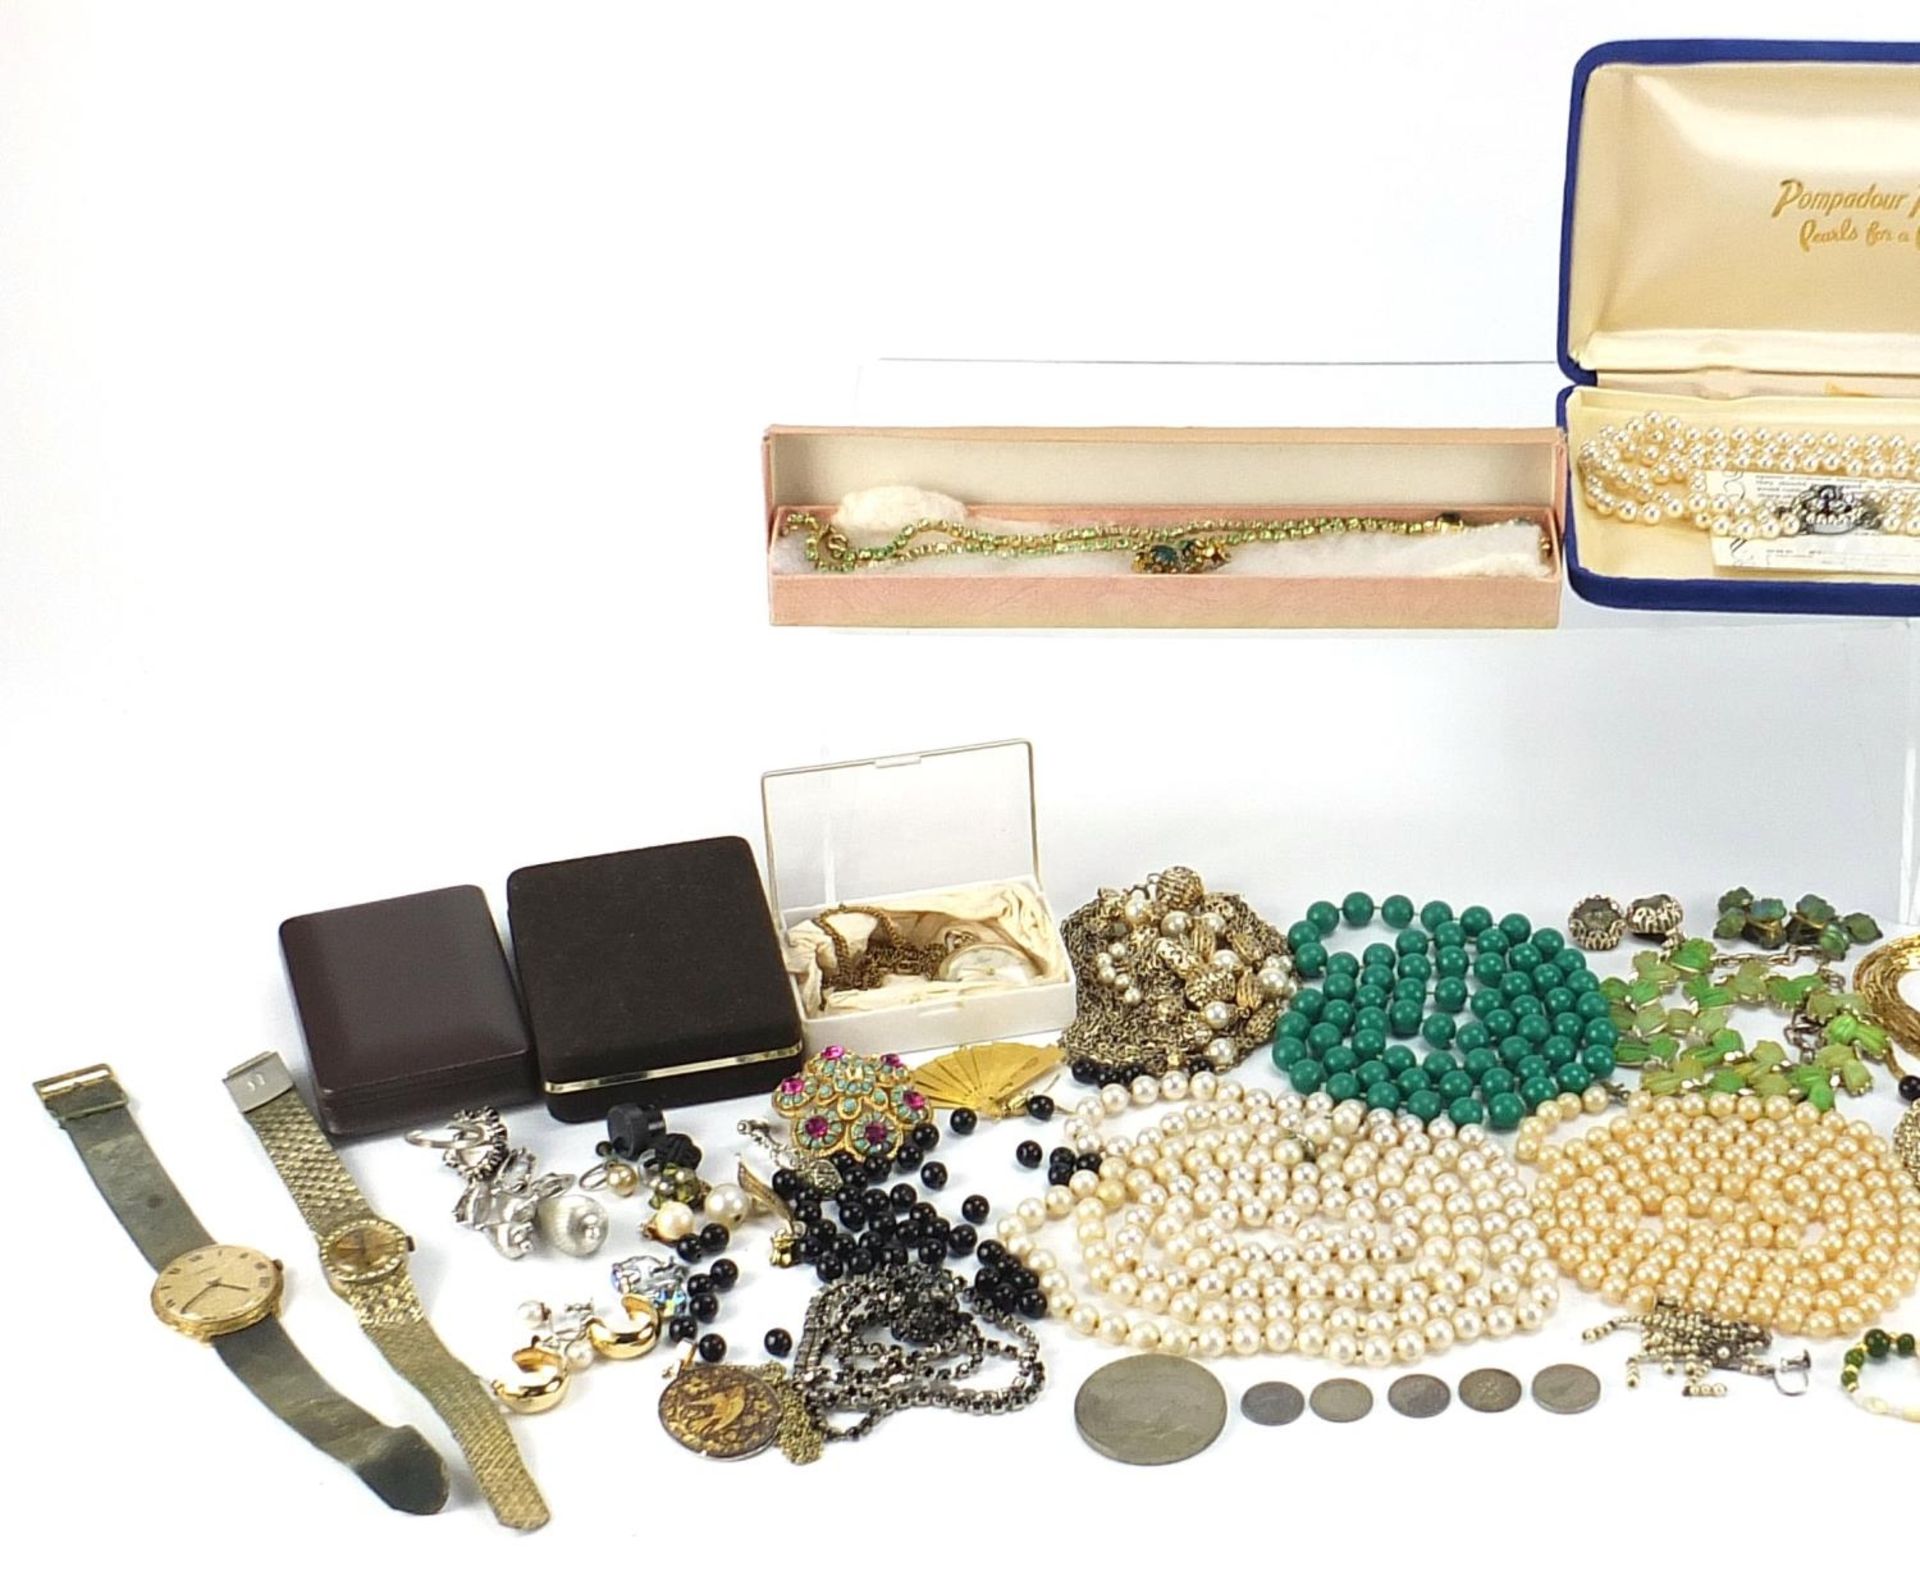 Vintage and later jewellery including simulated pearl necklaces, wristwatches, earrings and brooches - Image 2 of 3